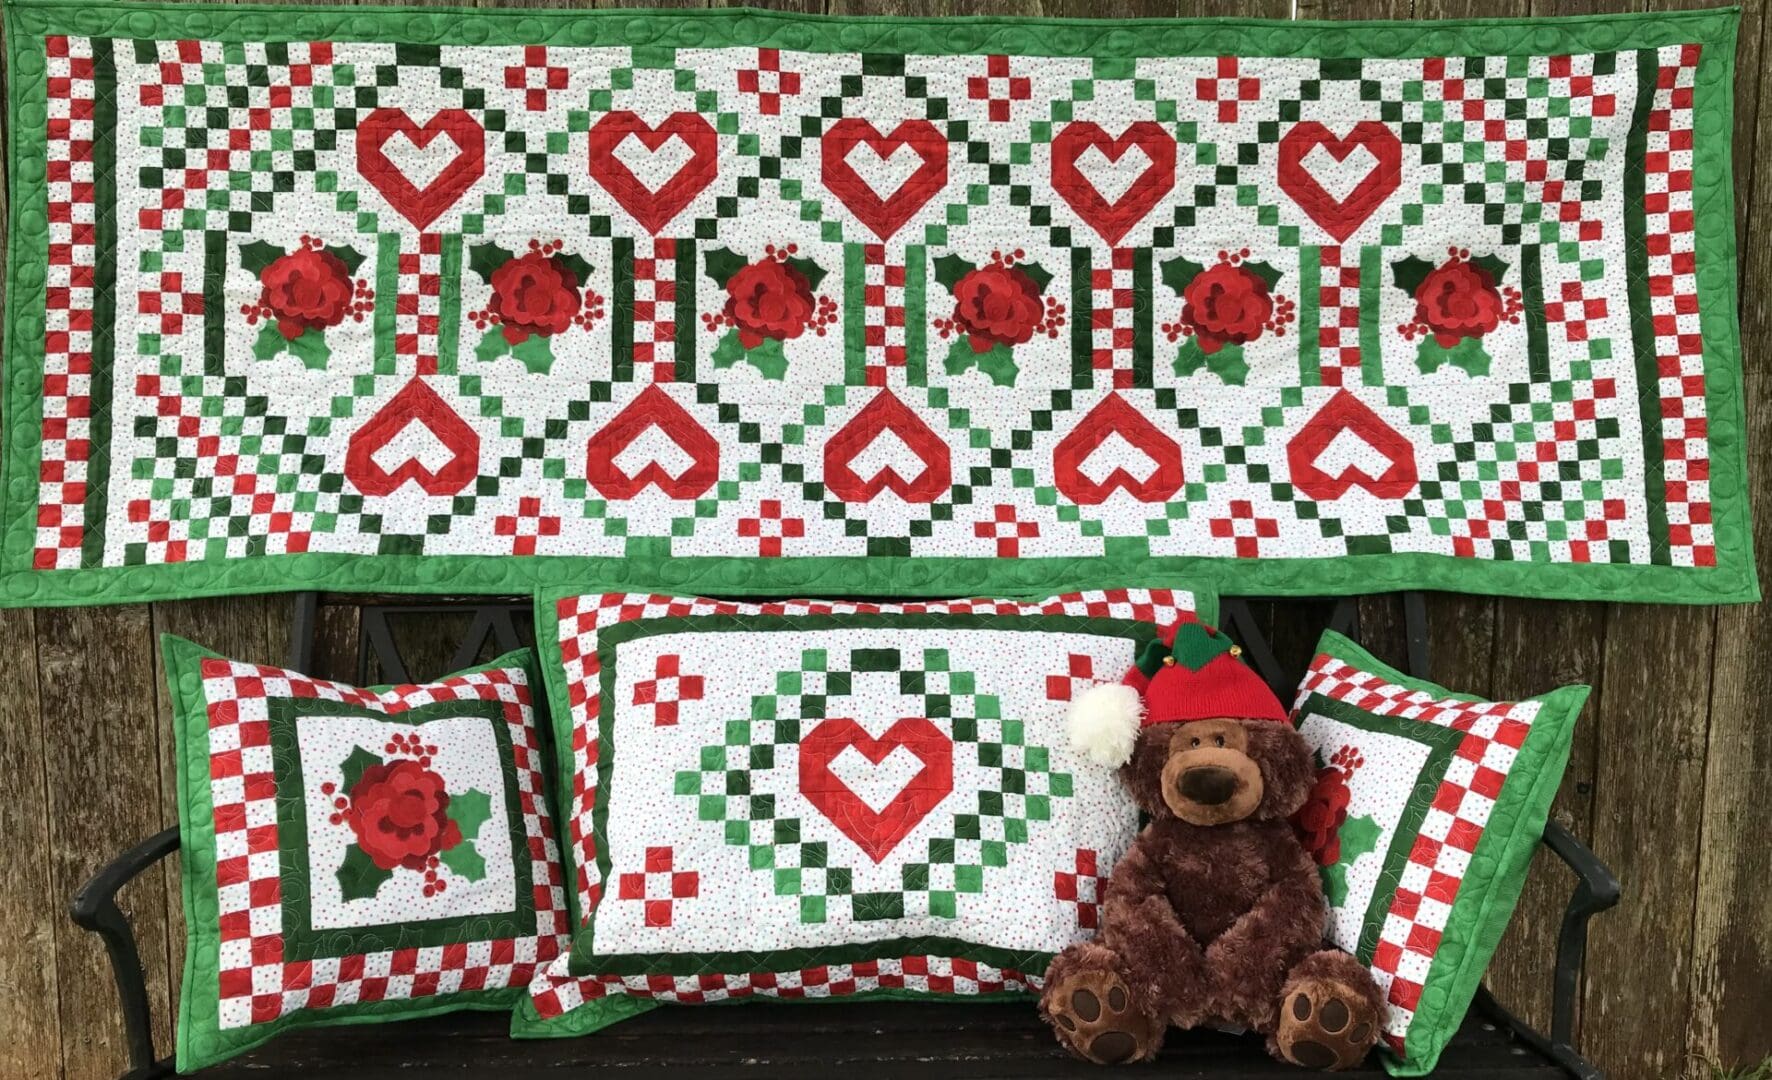 A teddy bear sitting next to a quilt.